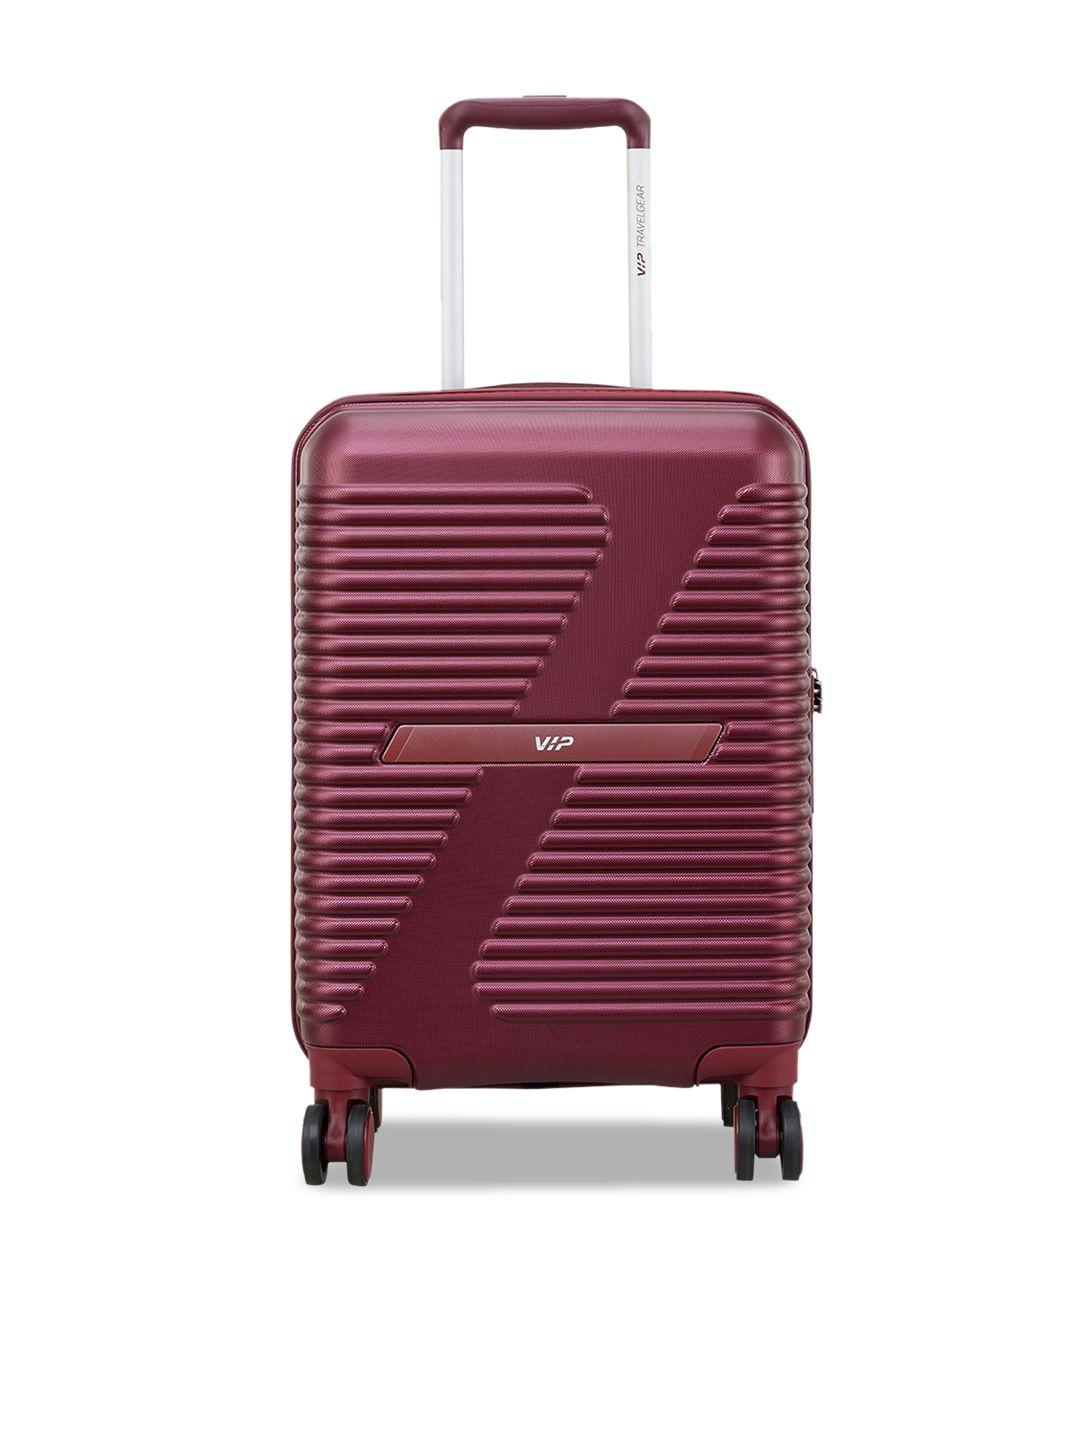 vip textured hard-sided 360 degree rotation cabin trolley suitcase